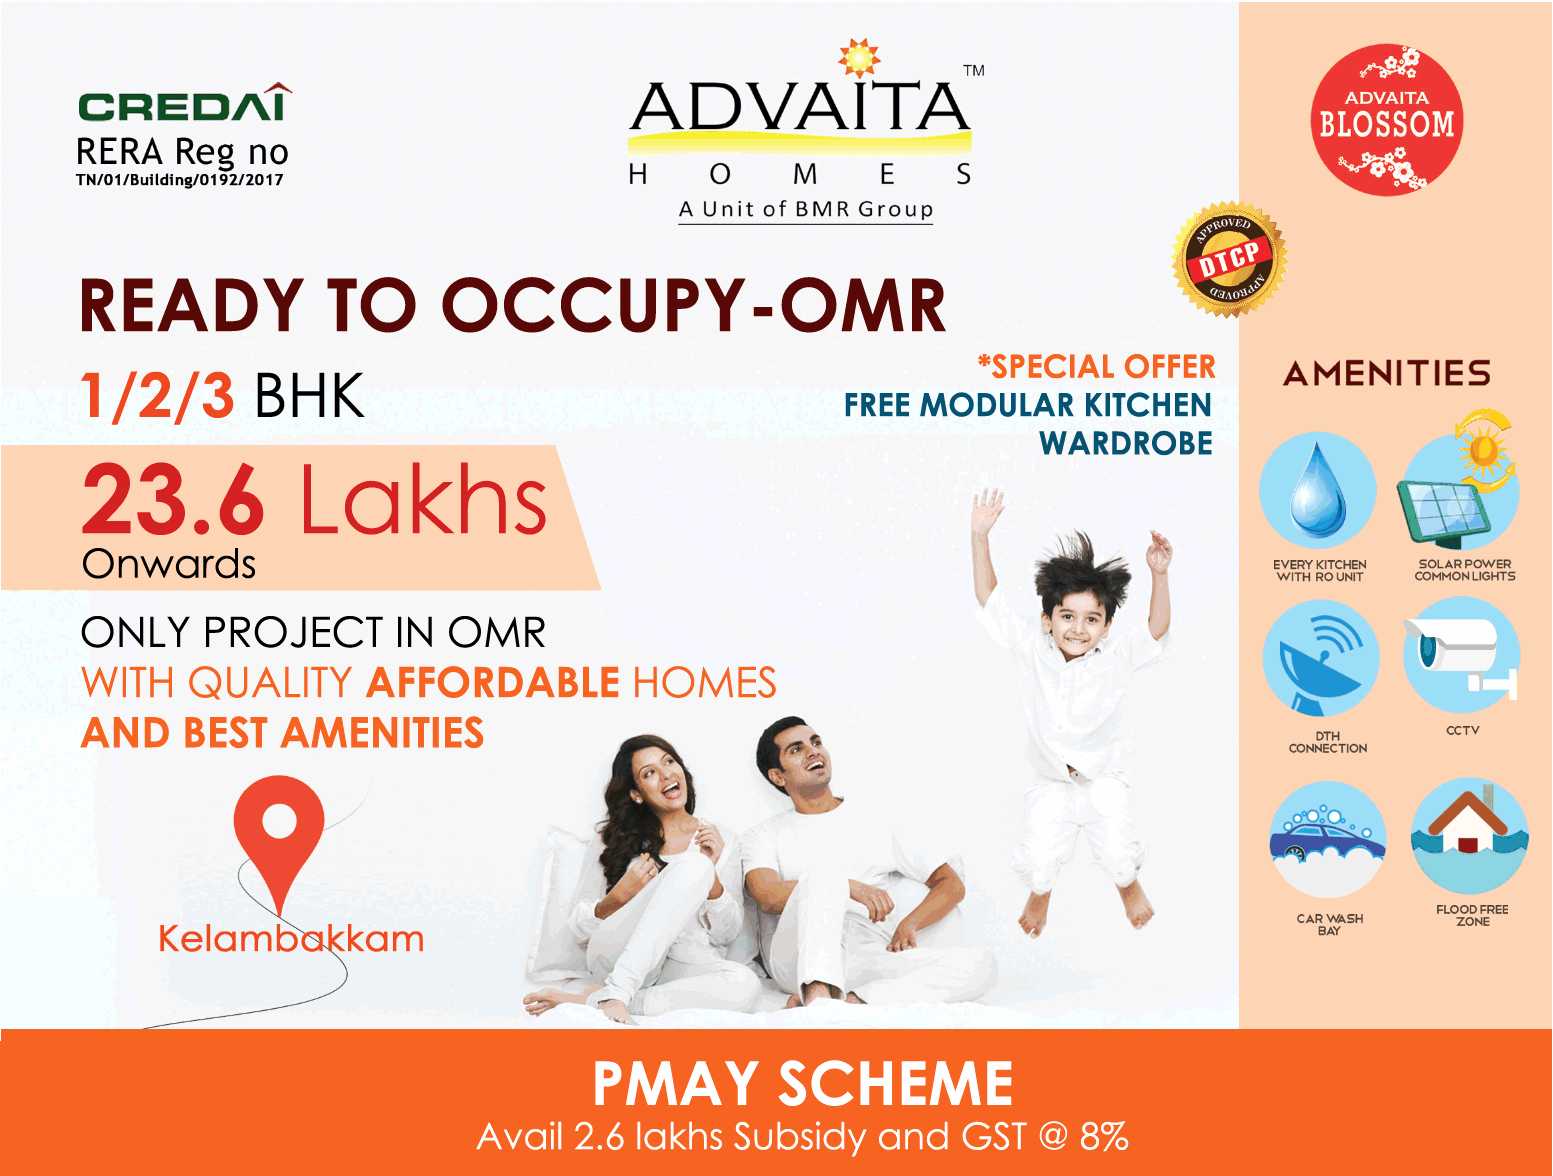 Avail 2.6 lakh subsidy & GST @ 8% at Advaita Blossom in Chennai Update